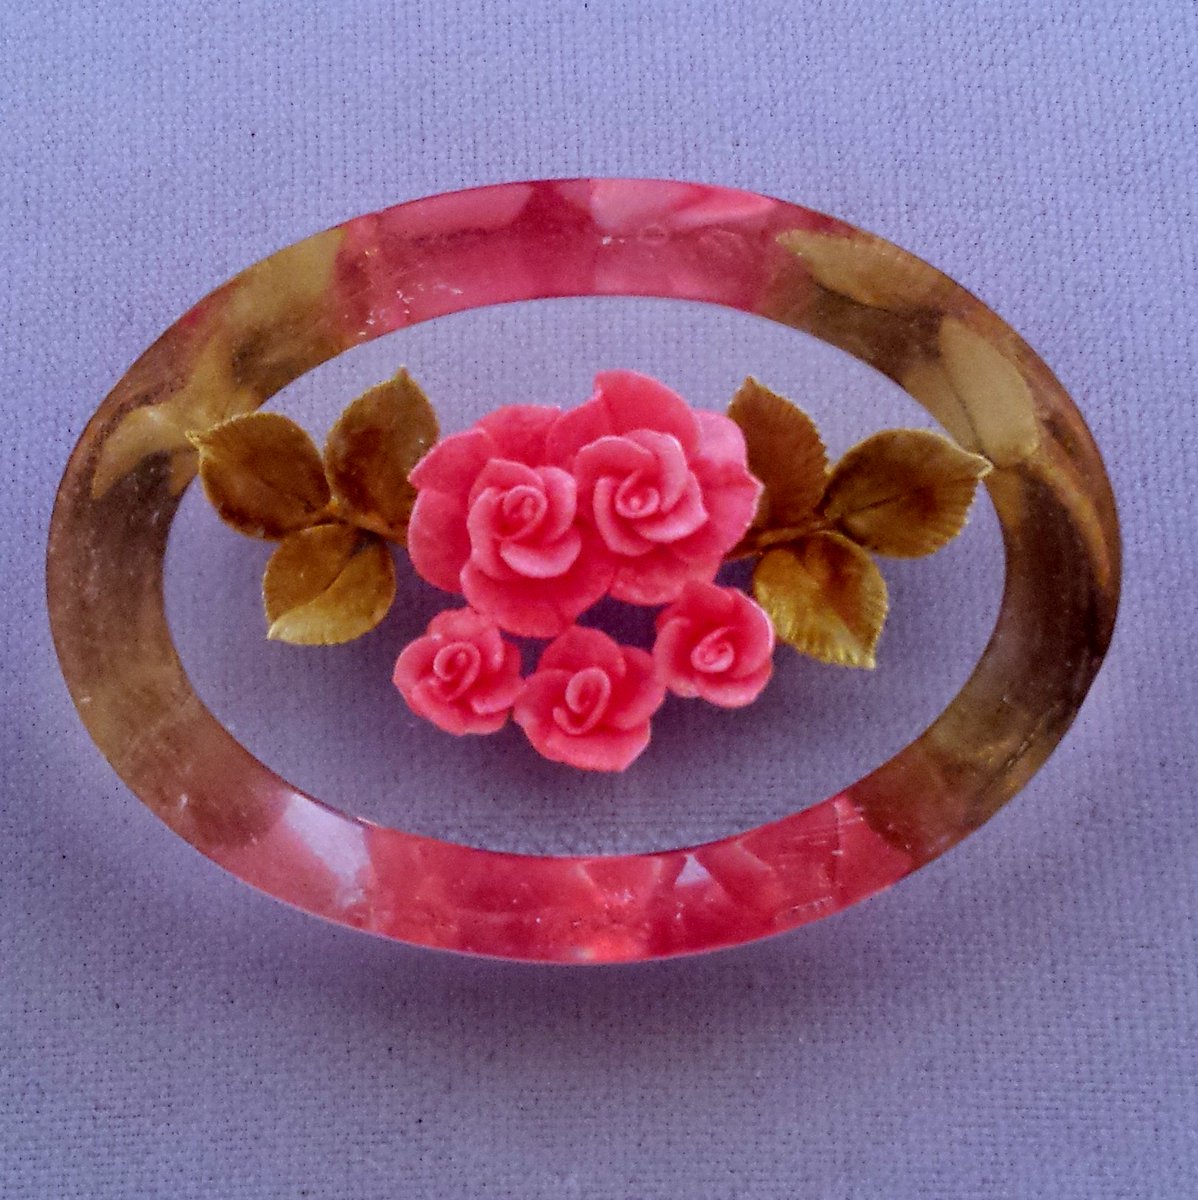 Lucite Reverse Carved and Painted Pink Rose Bouquet Oval Brooch bit.ly/25bBwrJ via @rubylane #CarvedLucite